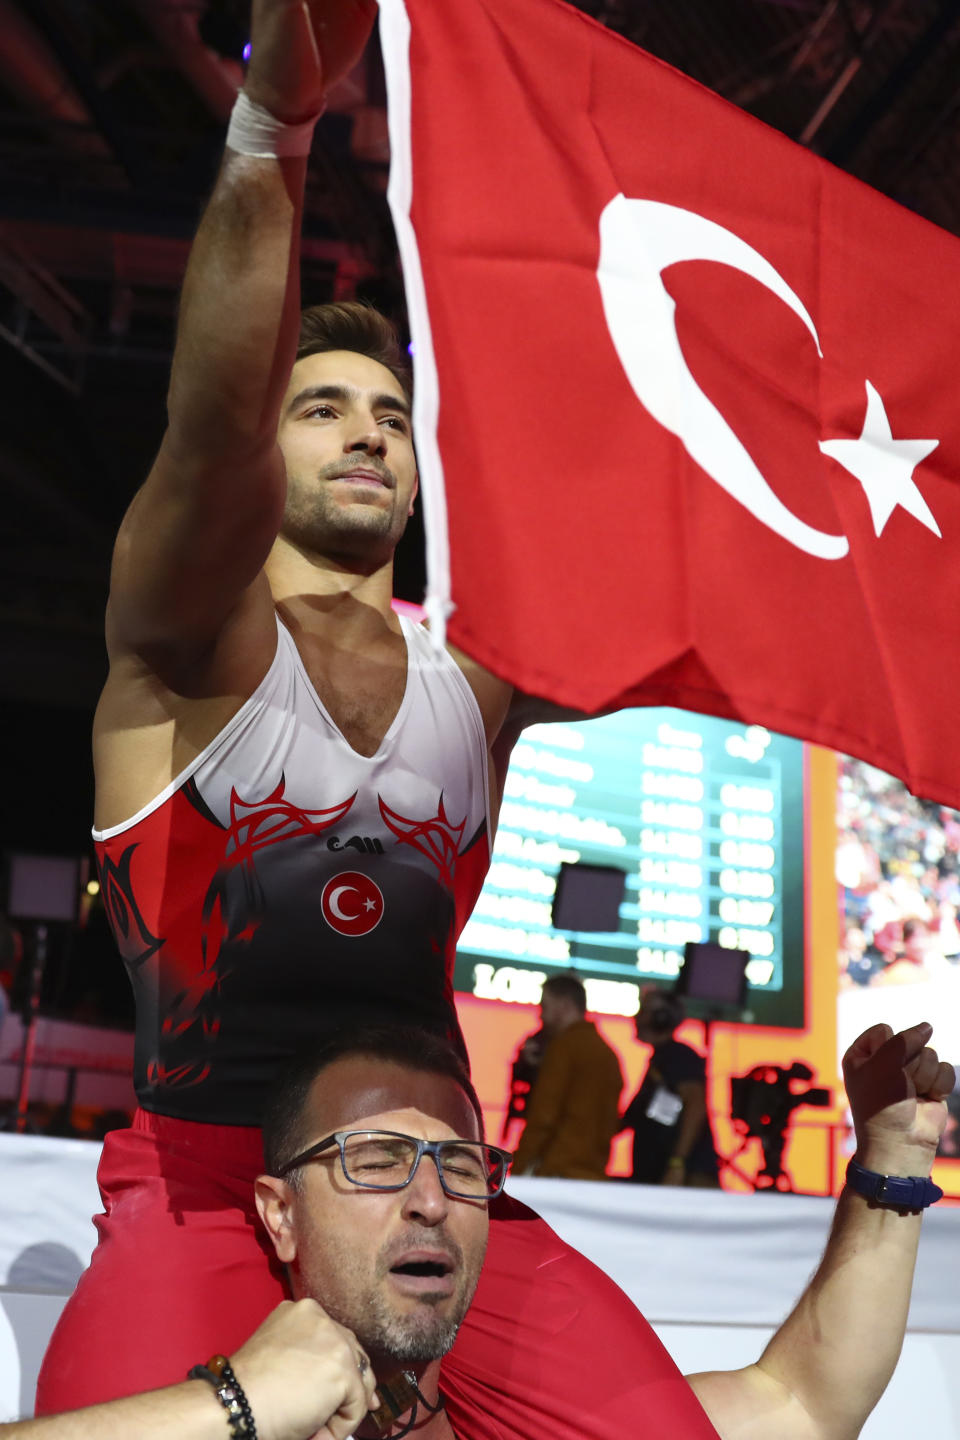 Gold medalist Ibrahim Colak of Turkey celebrates after his performance in the men's rings exercise during the apparatus finals at the Gymnastics World Championships in Stuttgart, Germany, Saturday, Oct. 12, 2019. (AP Photo/Matthias Schrader)